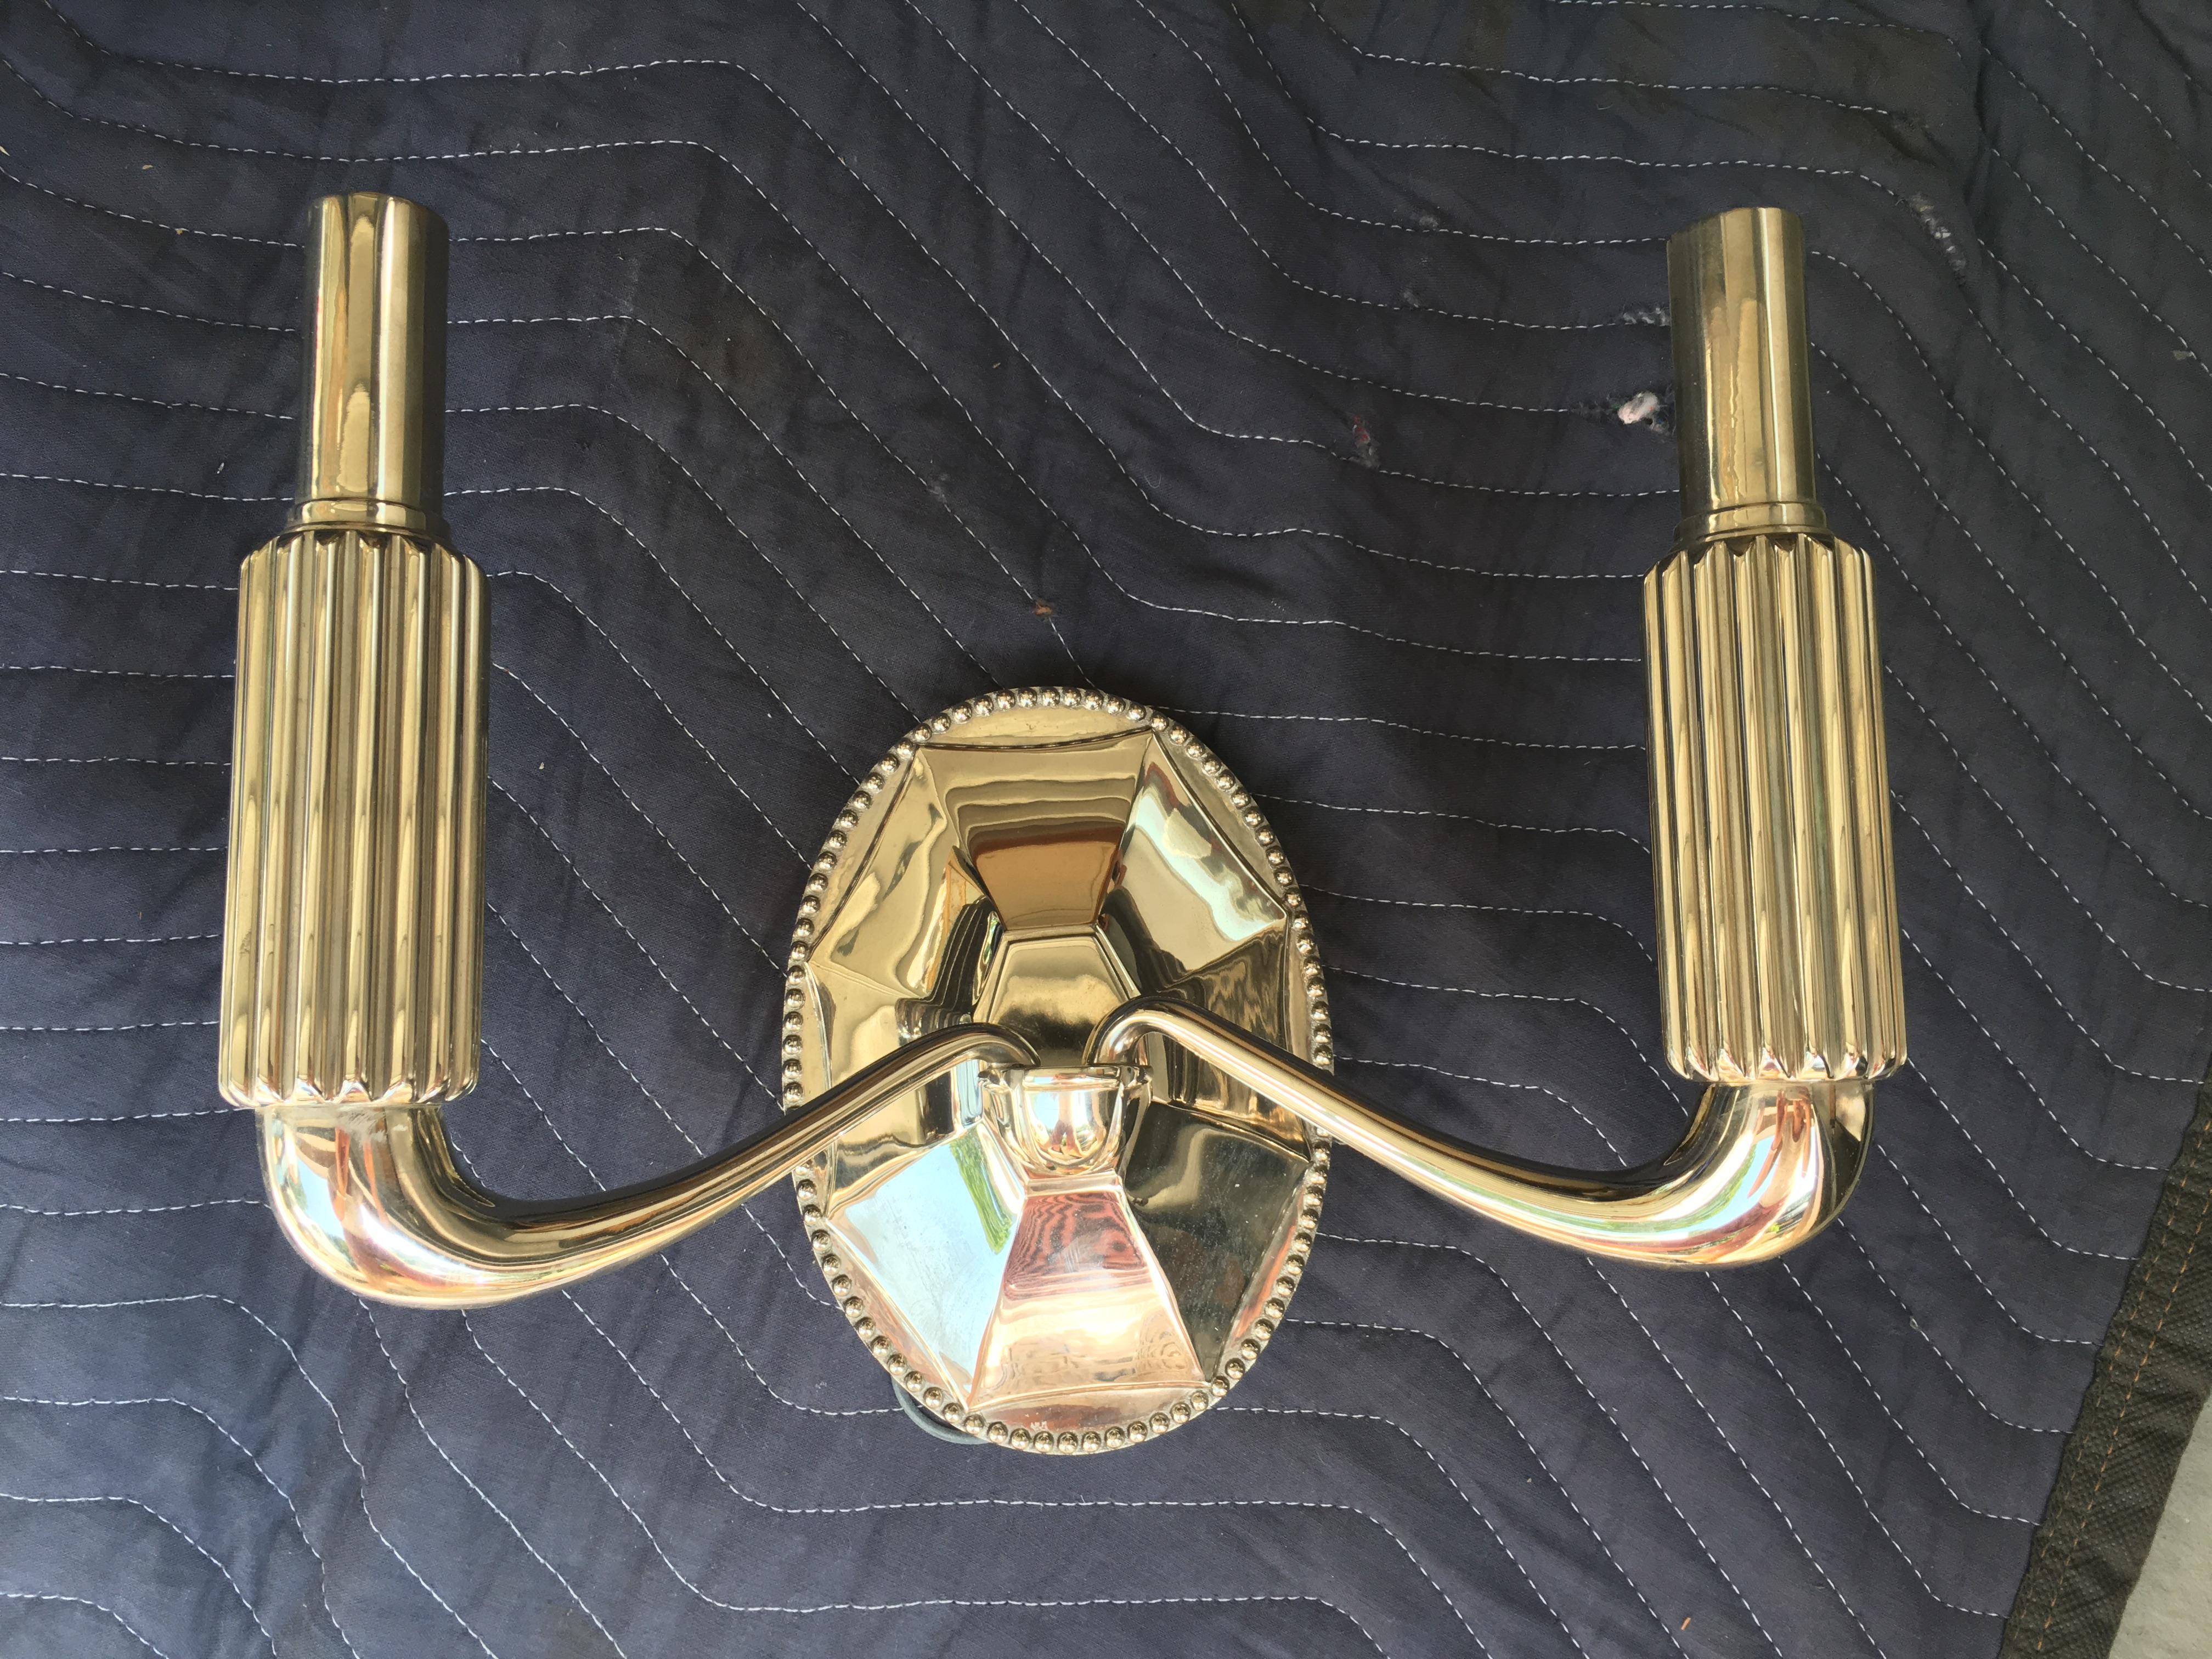 21st century single 'Paris Two Arm' sconce in polished nickel by Urban Archaeology.

This is handcrafted by Urban Archaeology designers and artisans in a beautiful Art Deco style design. 

This is a single two-arm sconce without shades.

Measures: